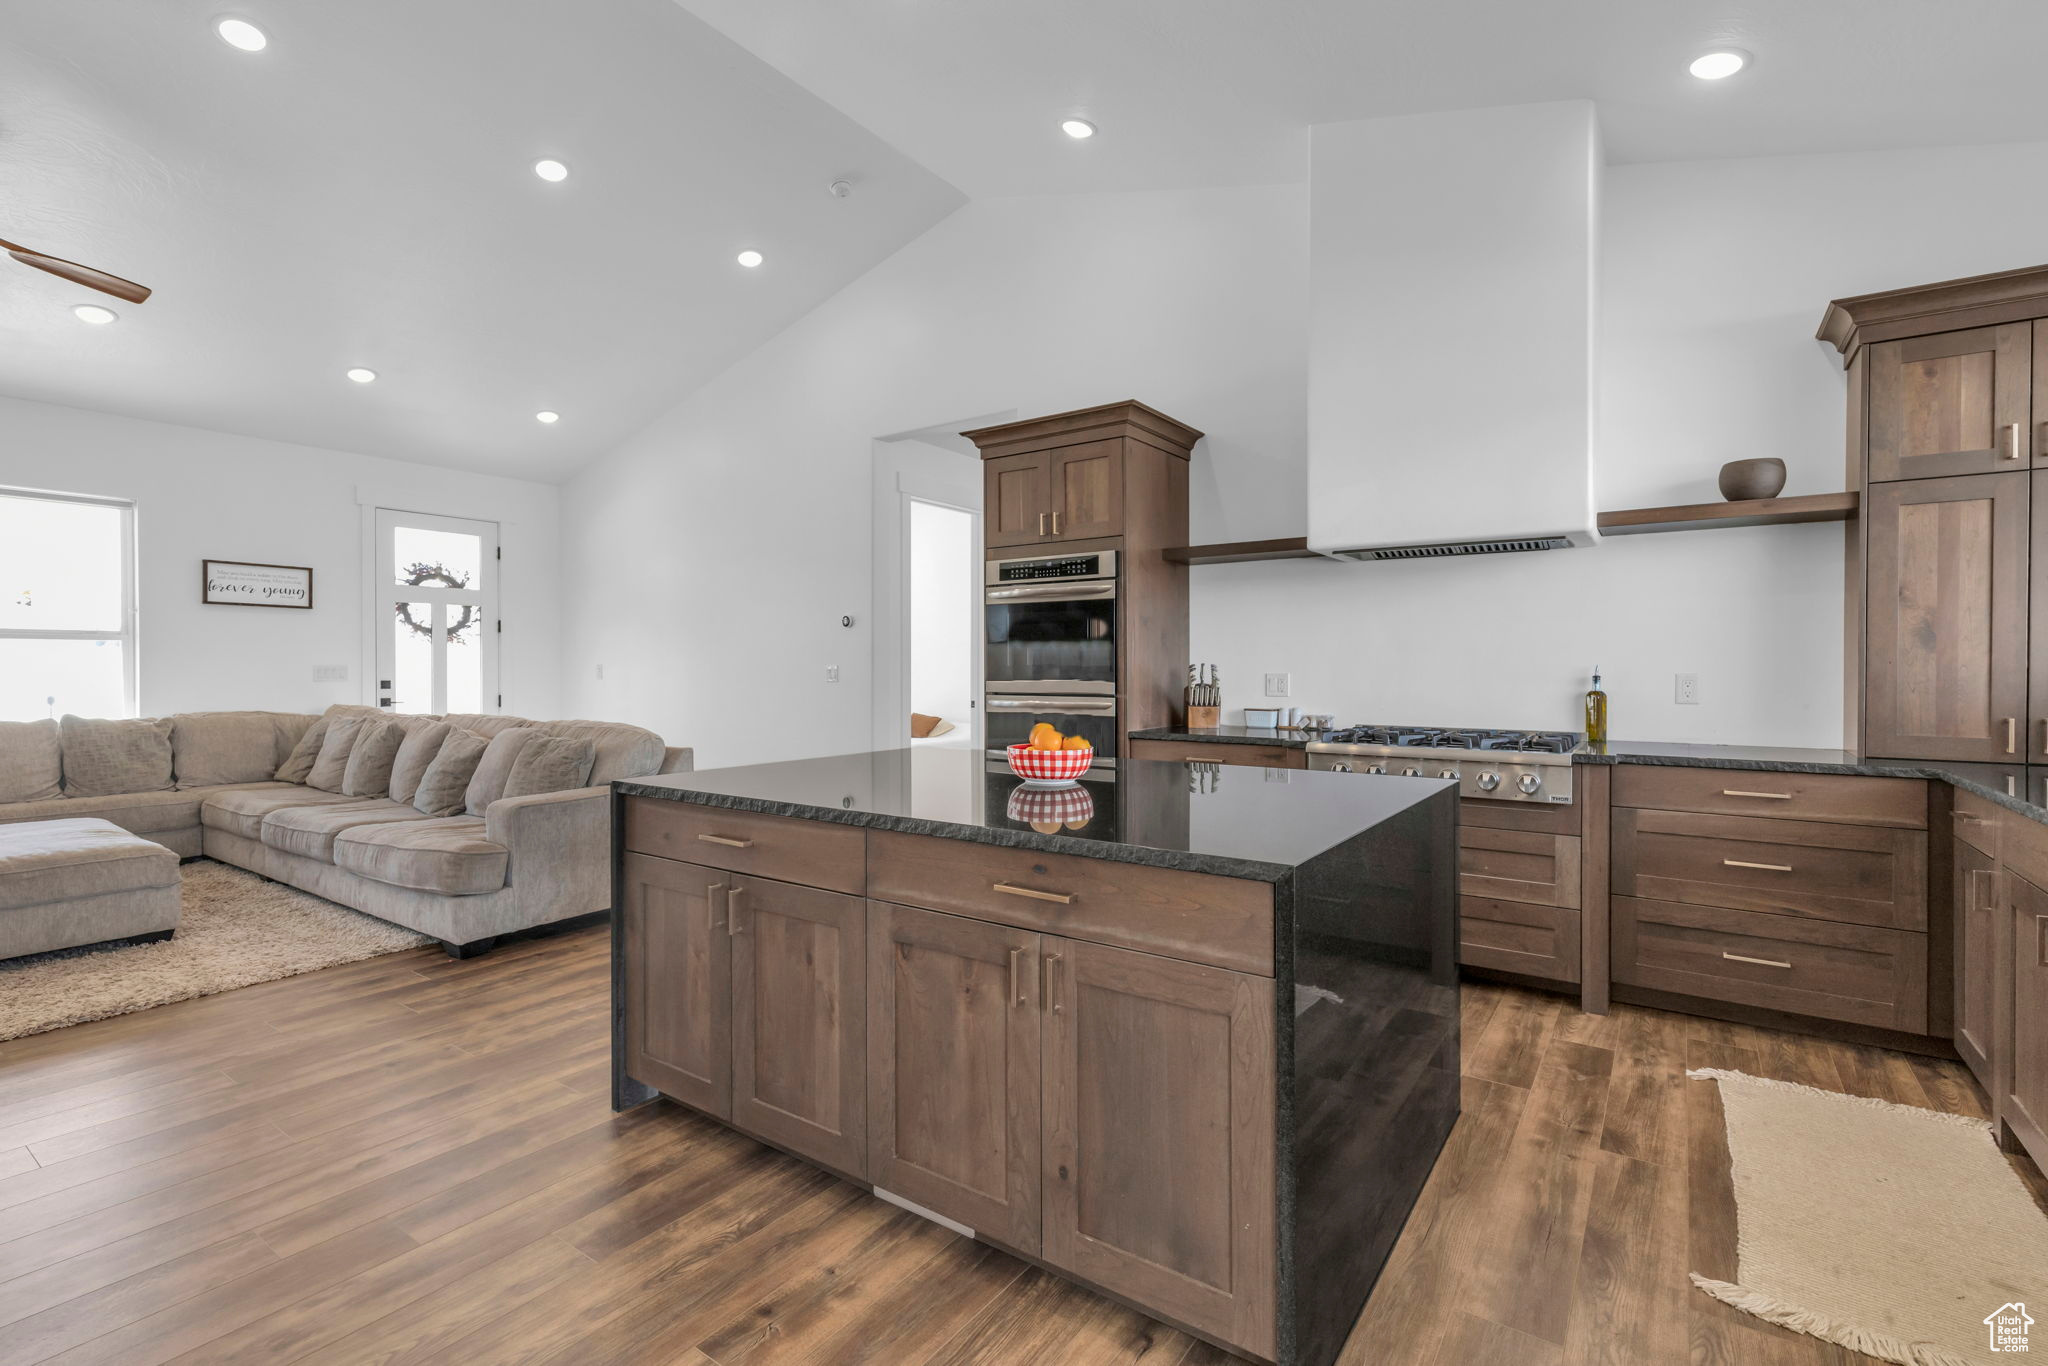 Kitchen with dark stone counters, appliances with stainless steel finishes, dark hardwood / wood-style floors, a center island, and ceiling fan